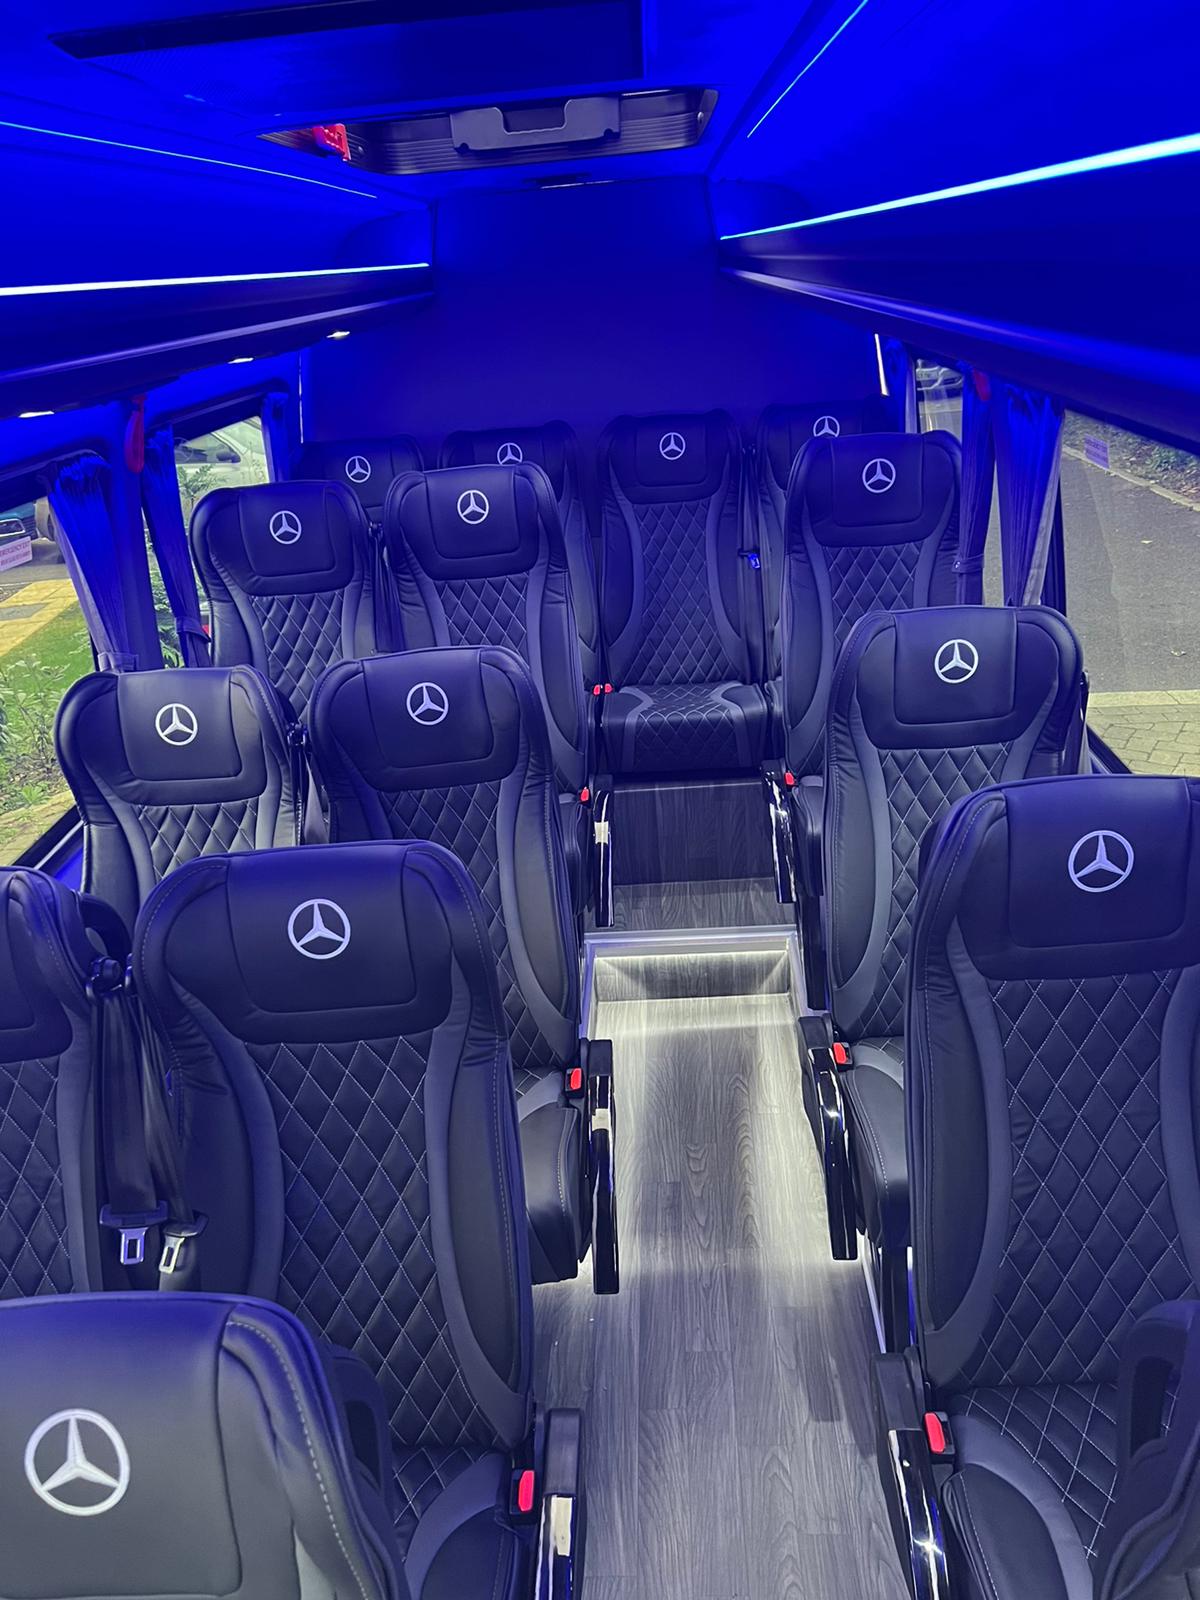 The Benefits of Minibus Hire for Group Travel Around London